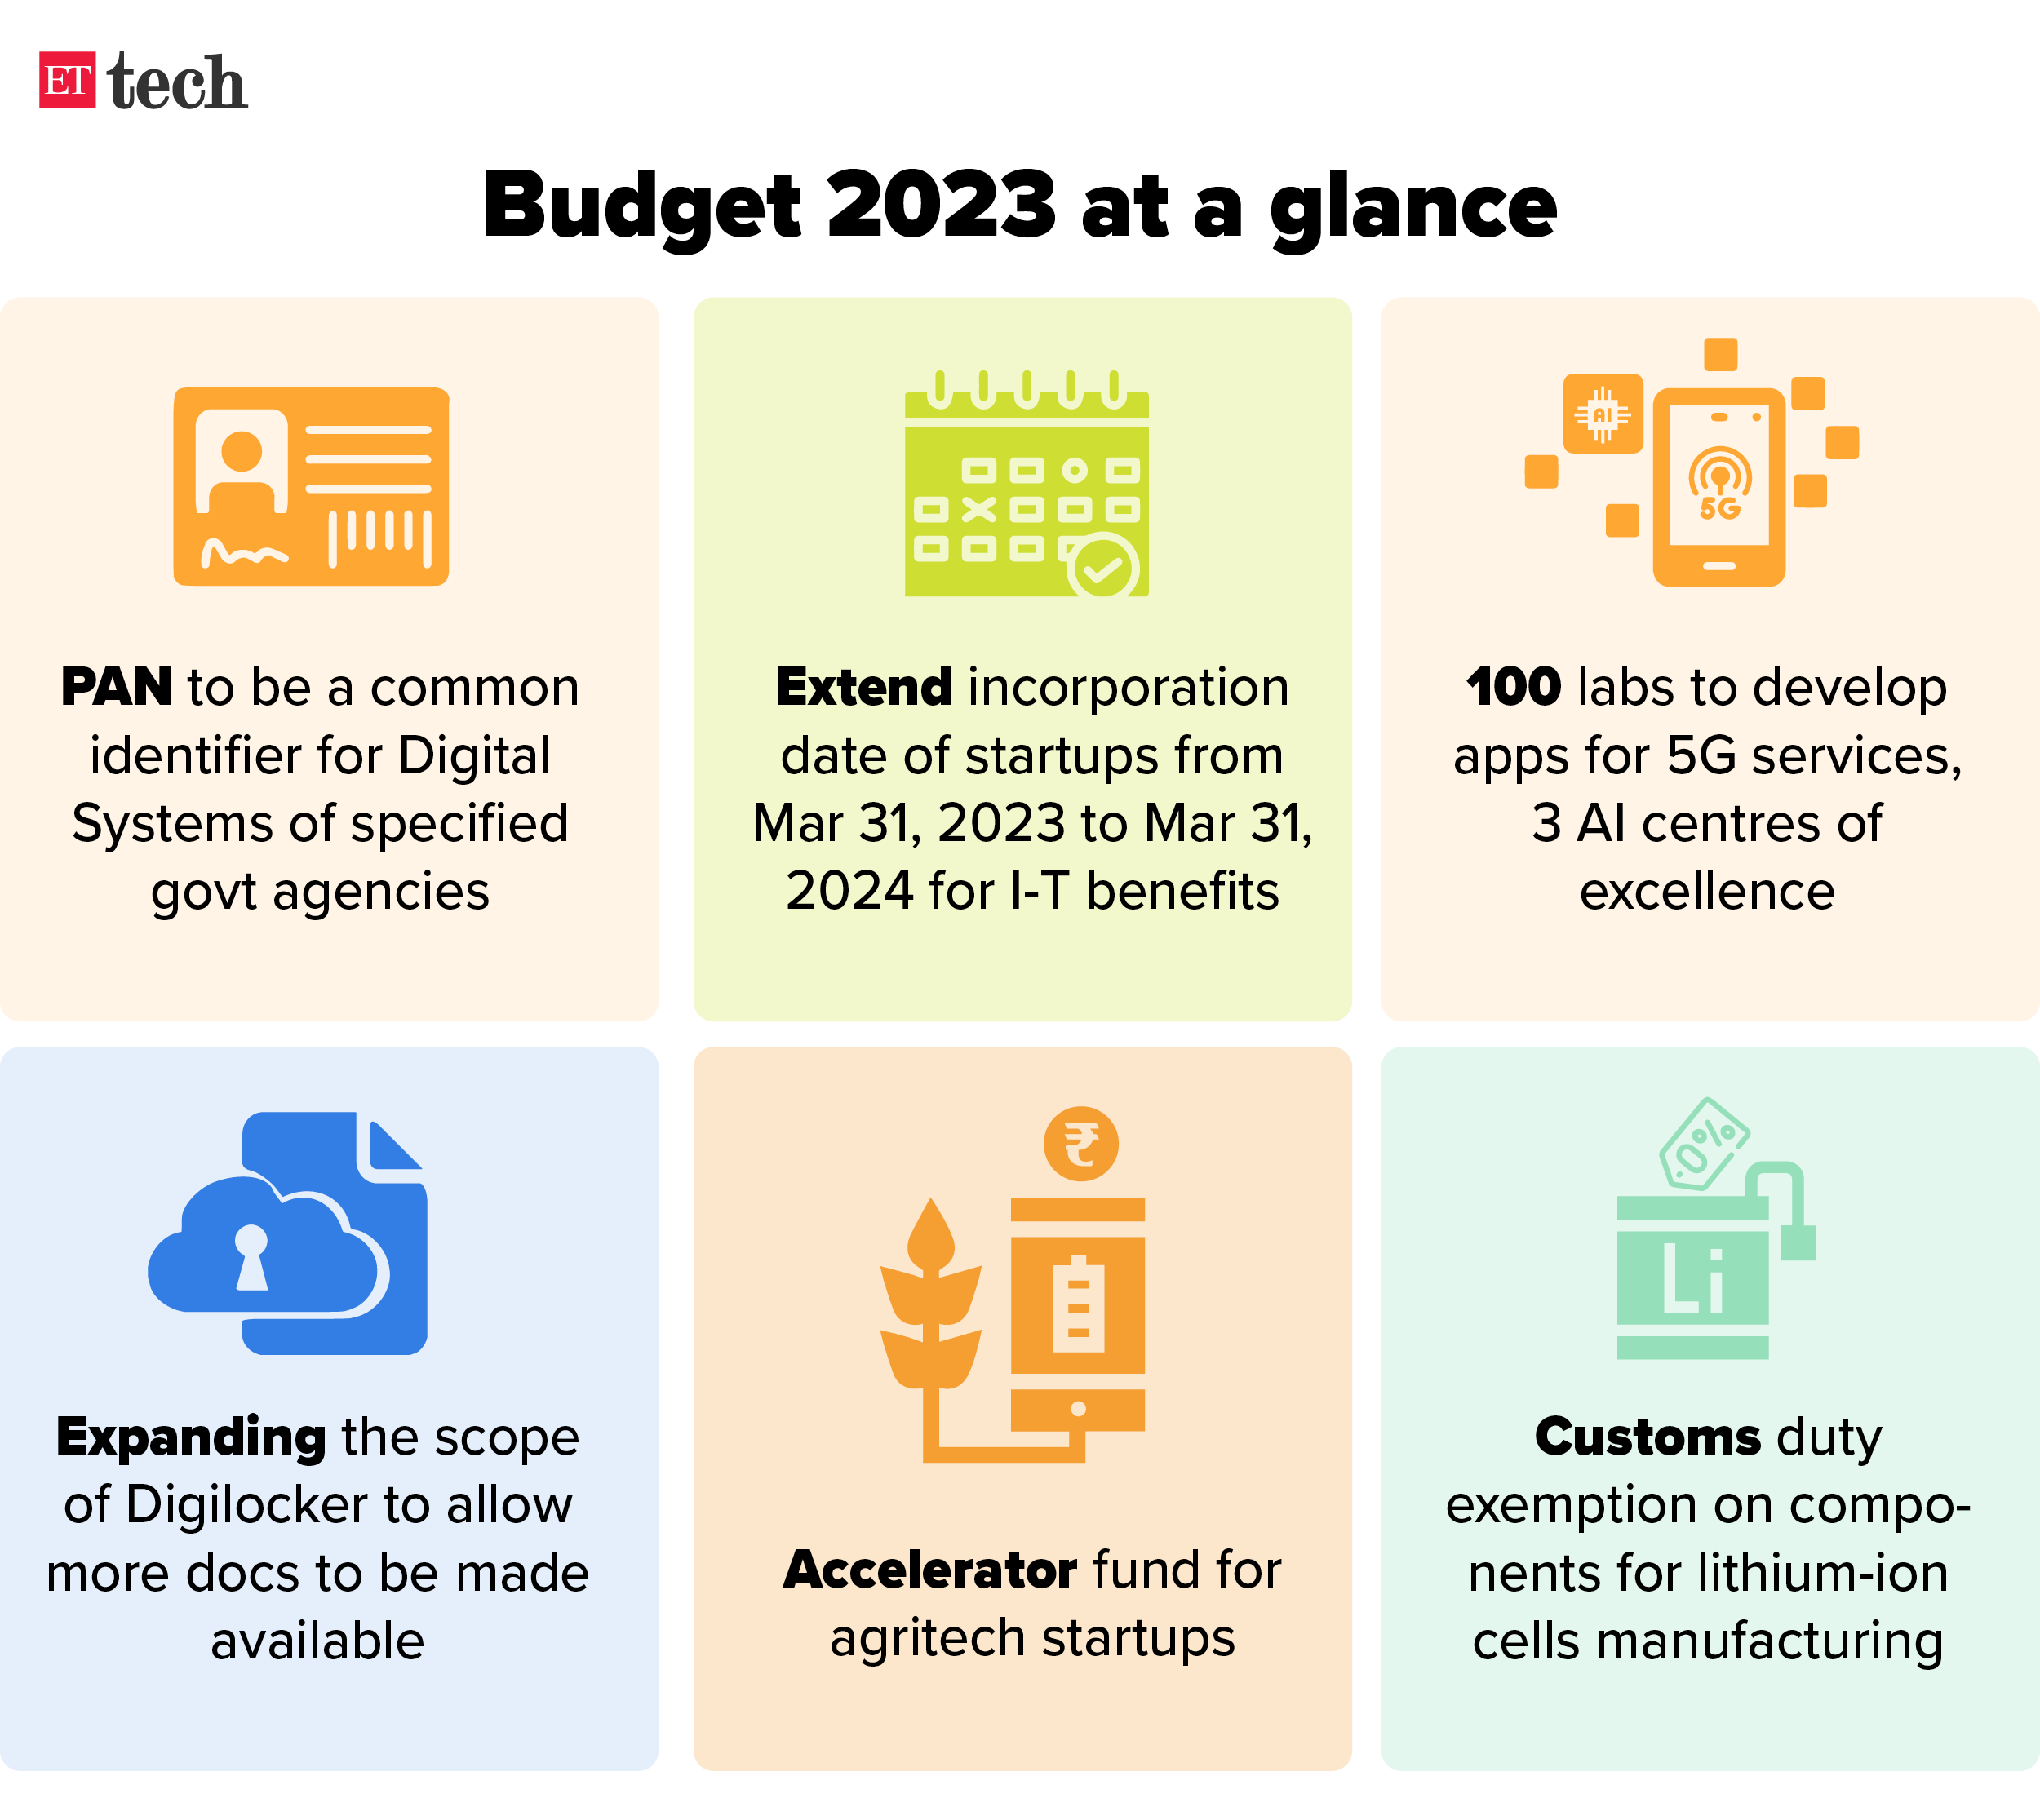 Budget 2023 at a glance_Graphic_ETTECH